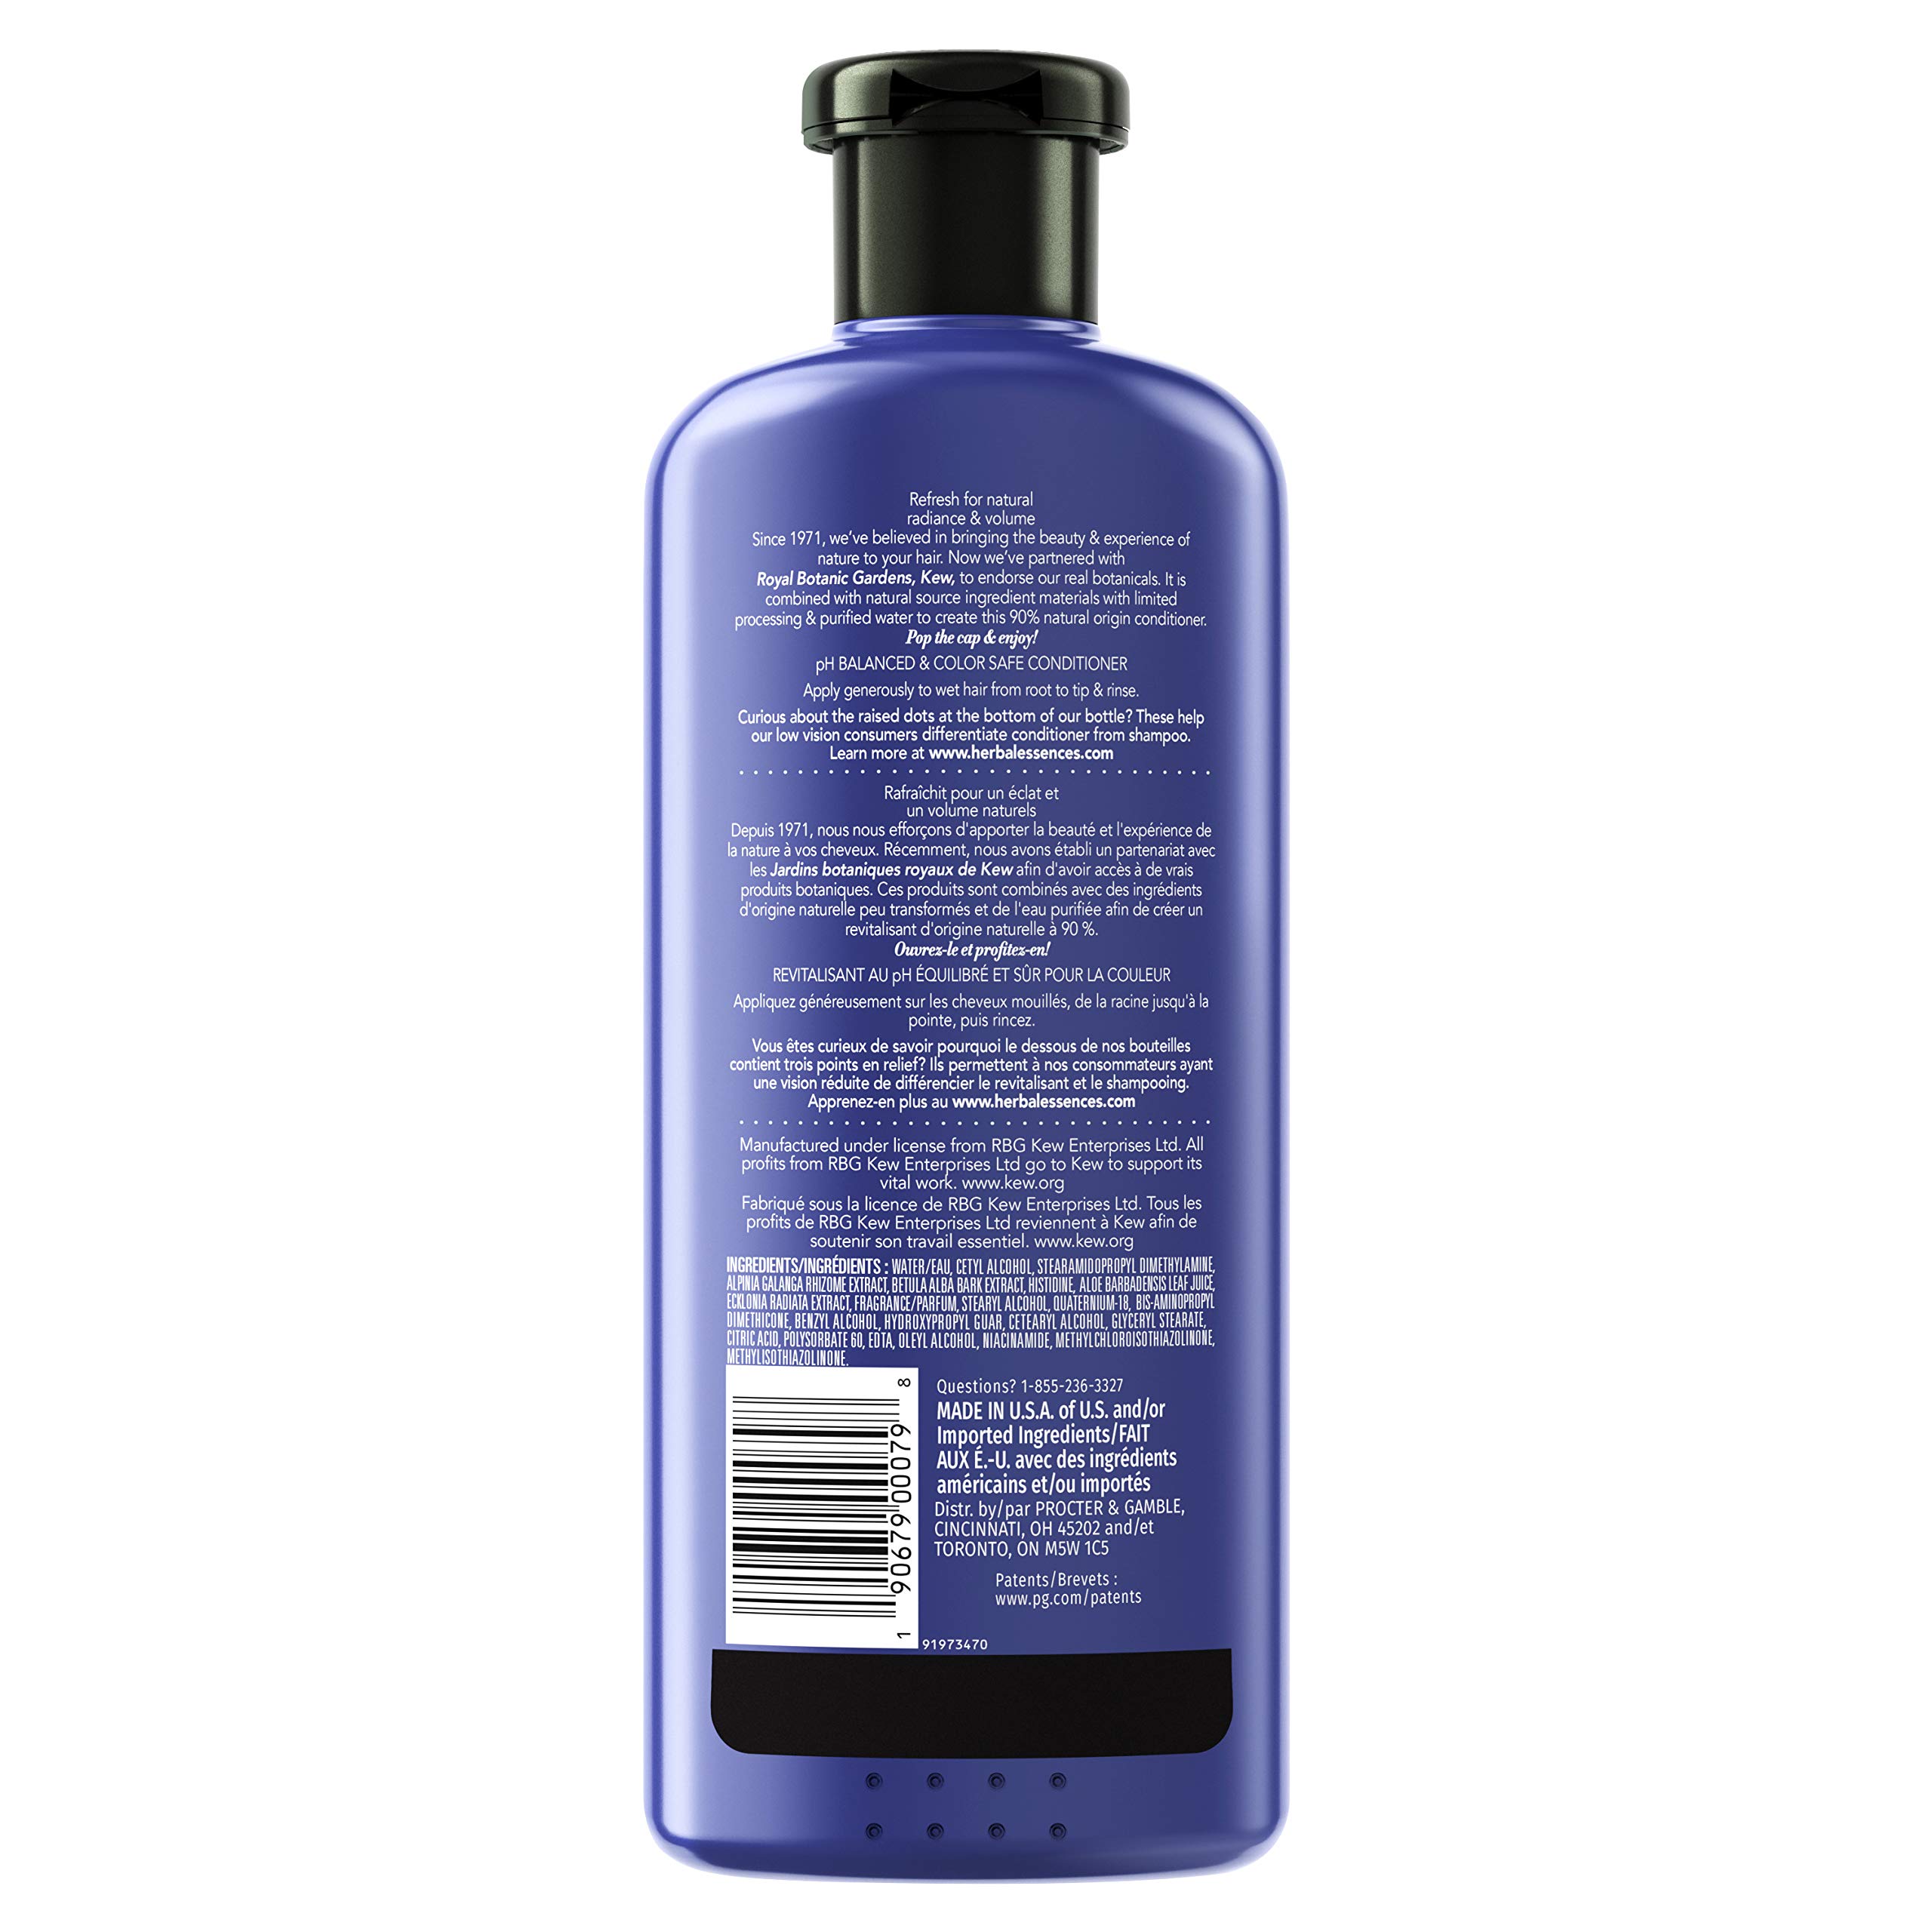 Herbal Essences Bio:Renew Blue Ginger Conditioner, Paraben Free, Safe for Color-Treated Hair, 13.5 Fl Oz (Pack of 1)